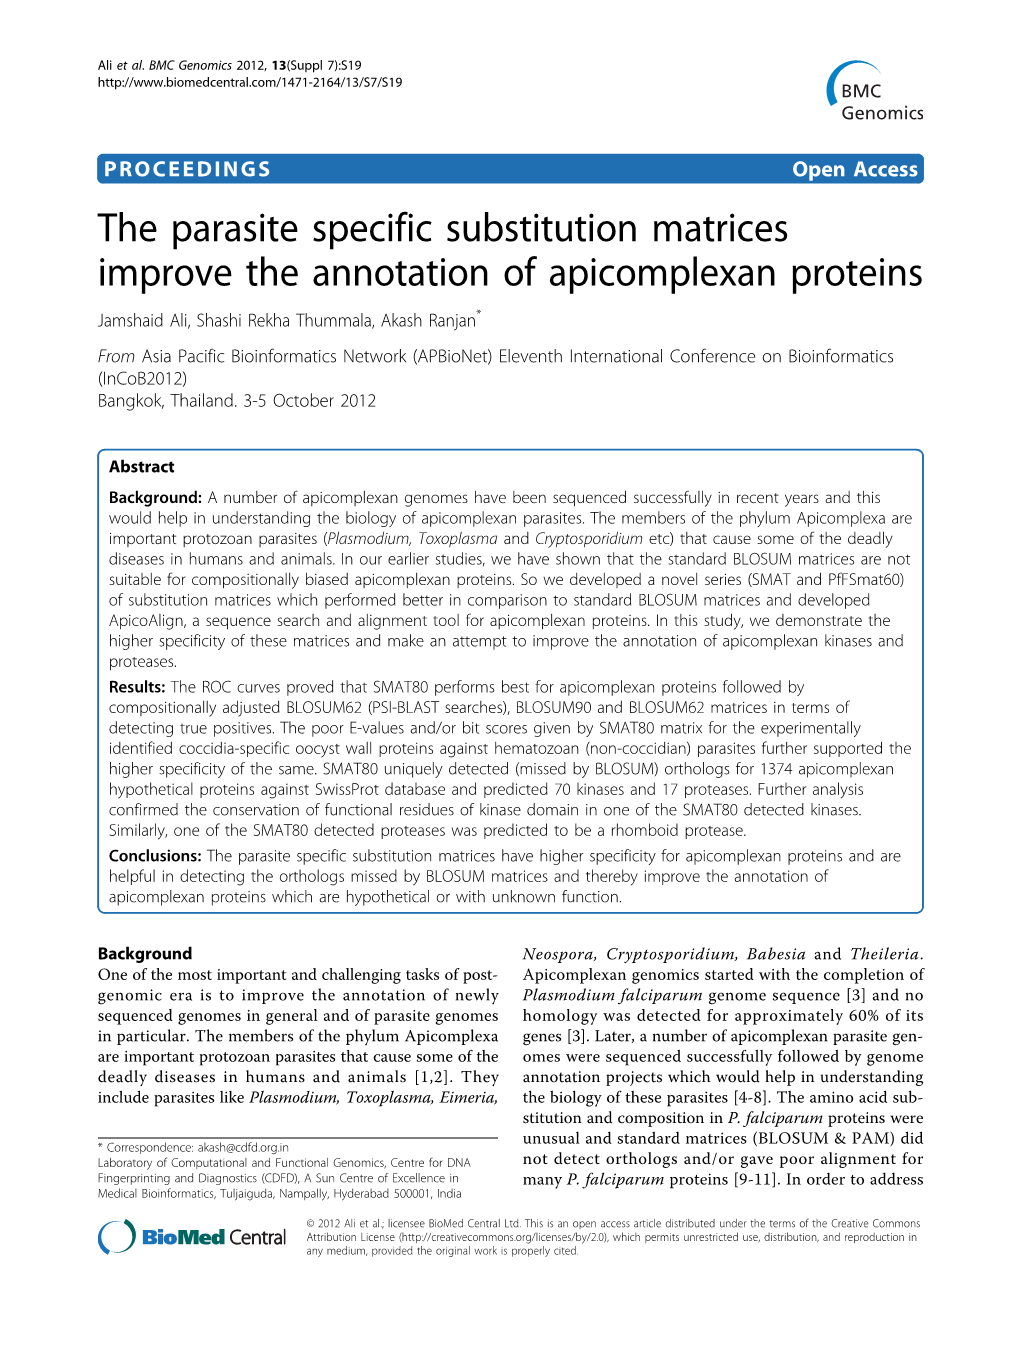 The Parasite Specific Substitution Matrices Improve the Annotation Of